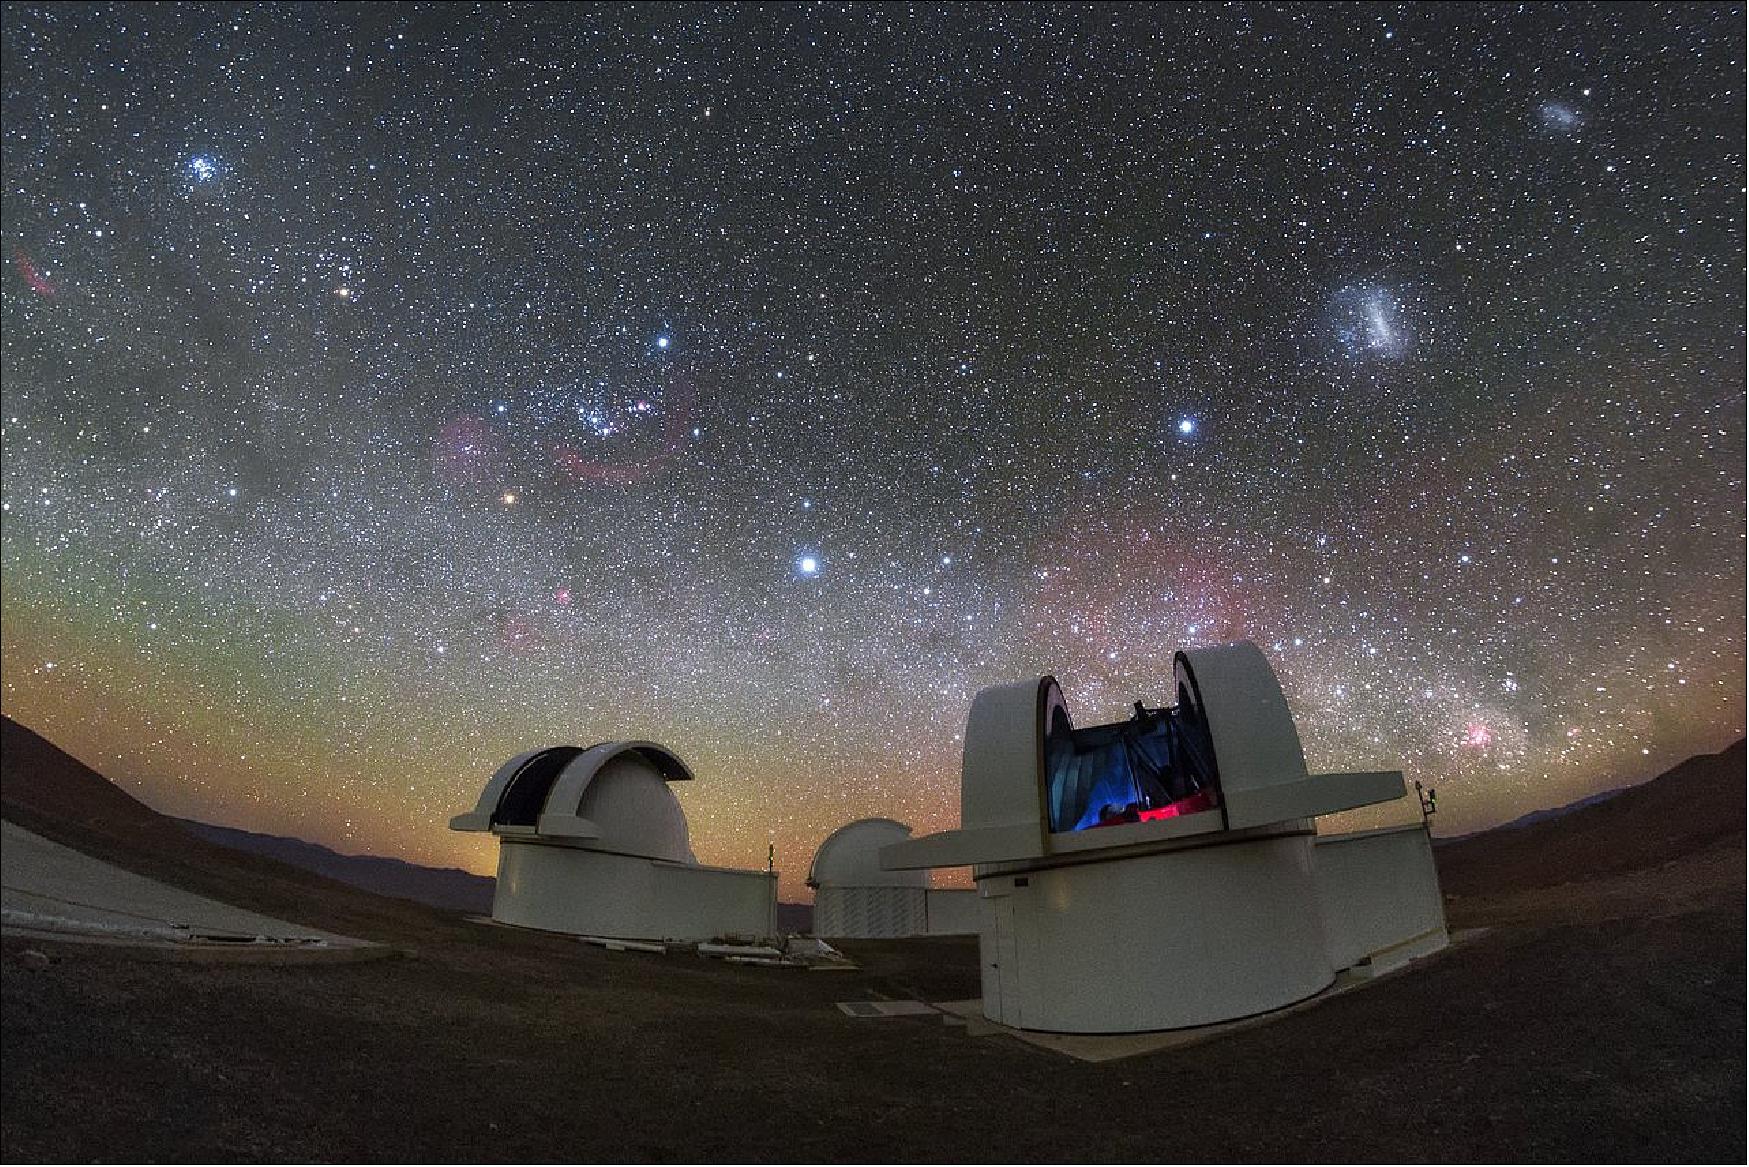 Figure 1: The telescopes of the SPECULOOS Southern Observatory gaze out into the stunning night sky over the Atacama Desert, Chile (image credit: ESO, P. Horálek) 2)